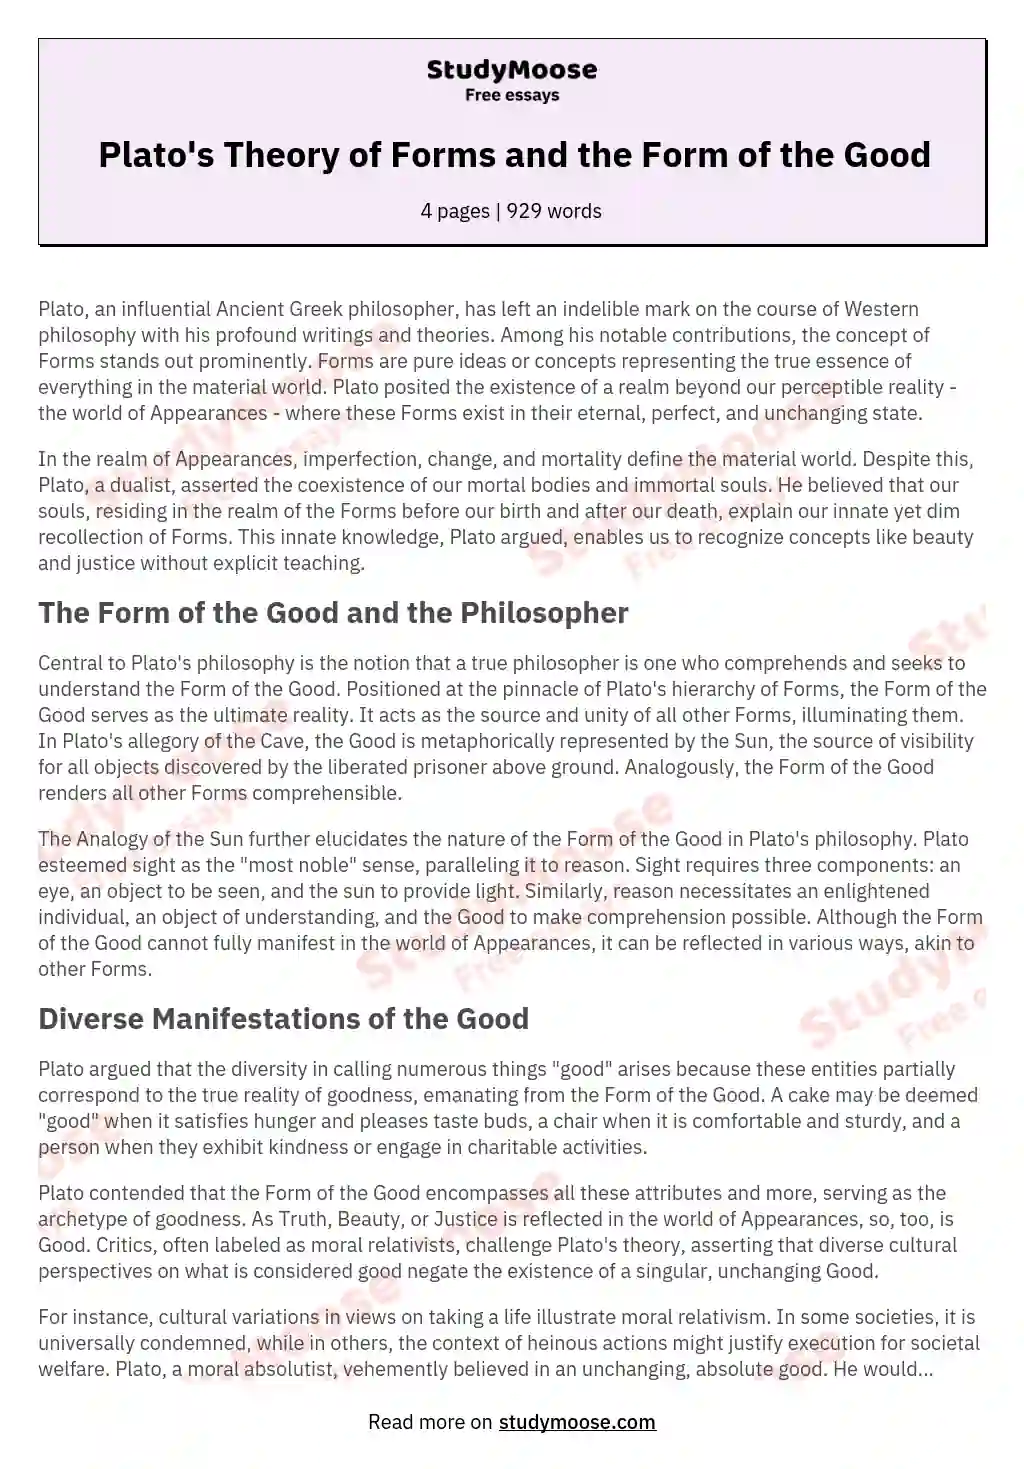 Plato's Theory of Forms and the Form of the Good essay